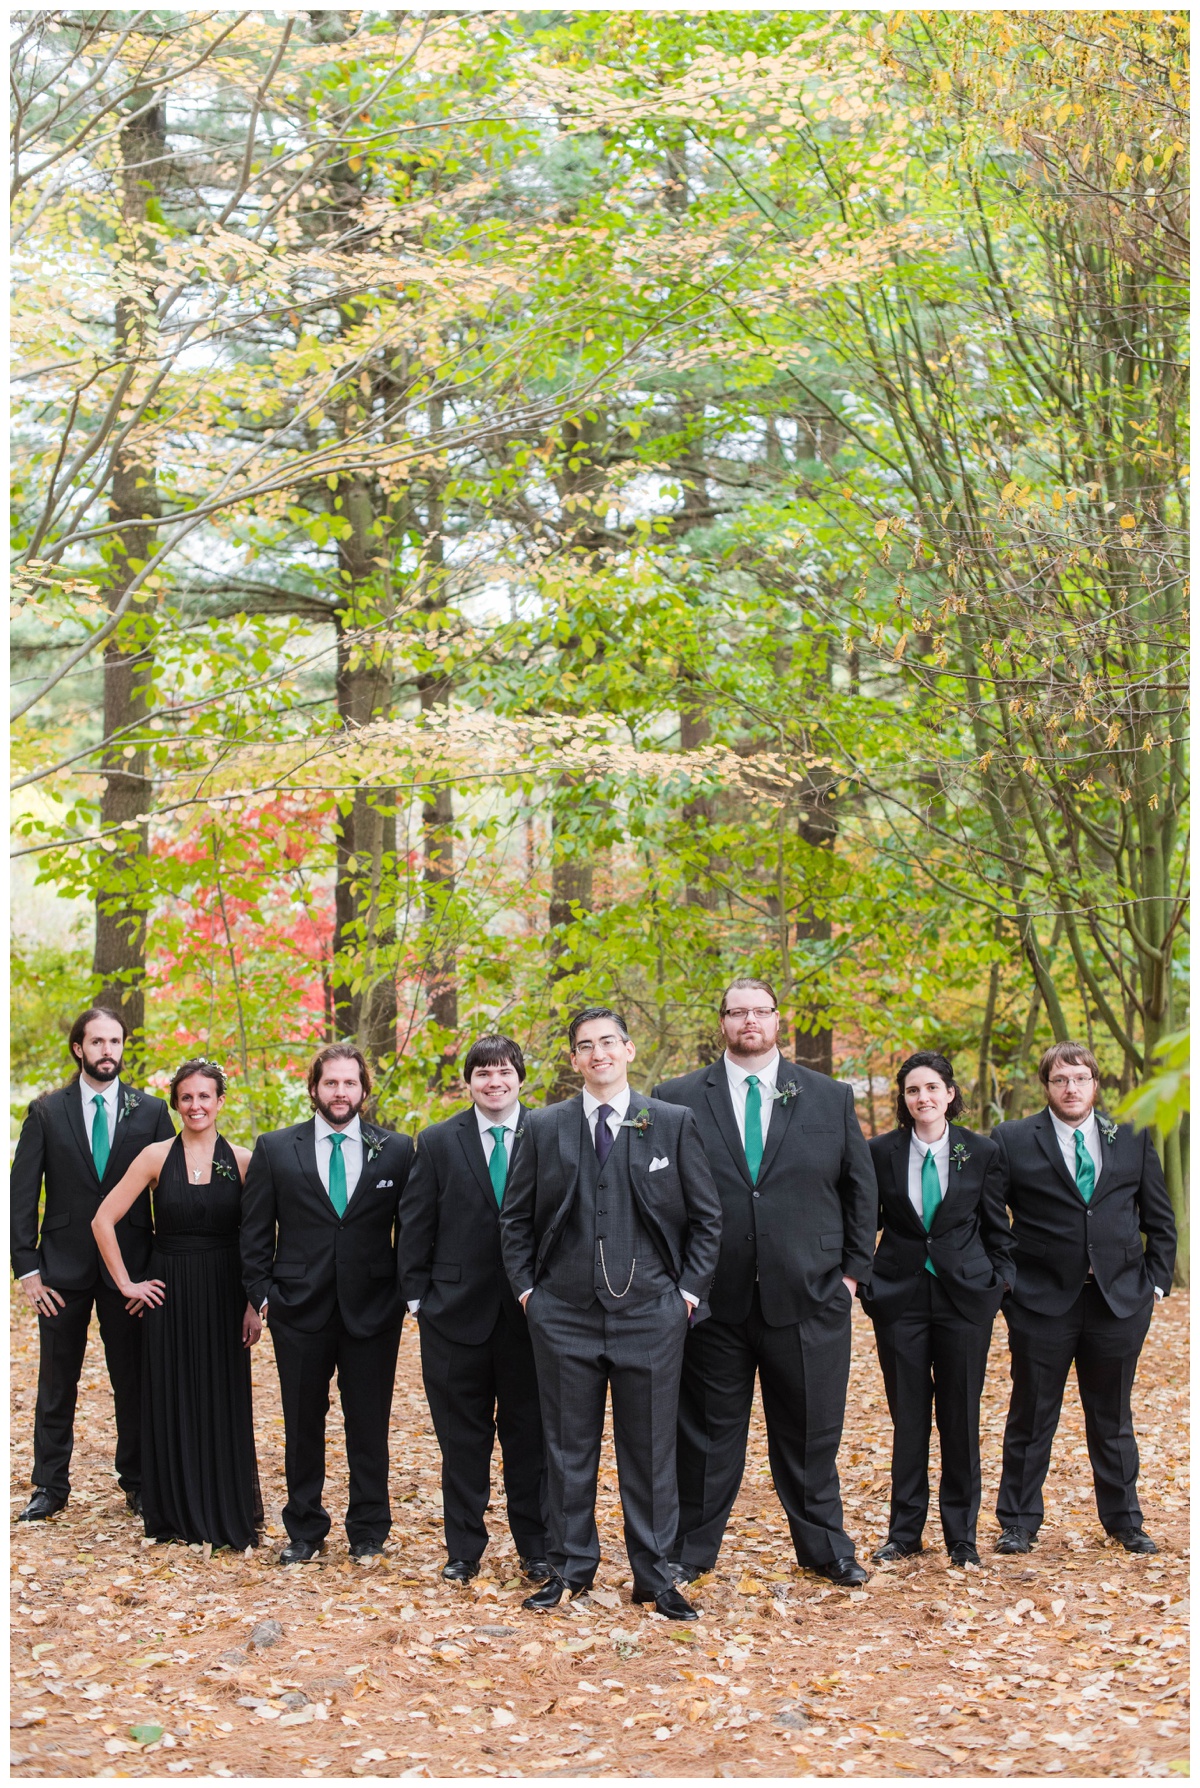 Whimsical Woodland Fall Wedding at mountain memories at thorpewood in thurmont maryland in october by sarah & dave photography richmond wedding photographer groom and groomsmen and groomswoman wedding party formal portraits black dress green ties charcoal gray black suit in the woods forest outdoor inspired wedding photo